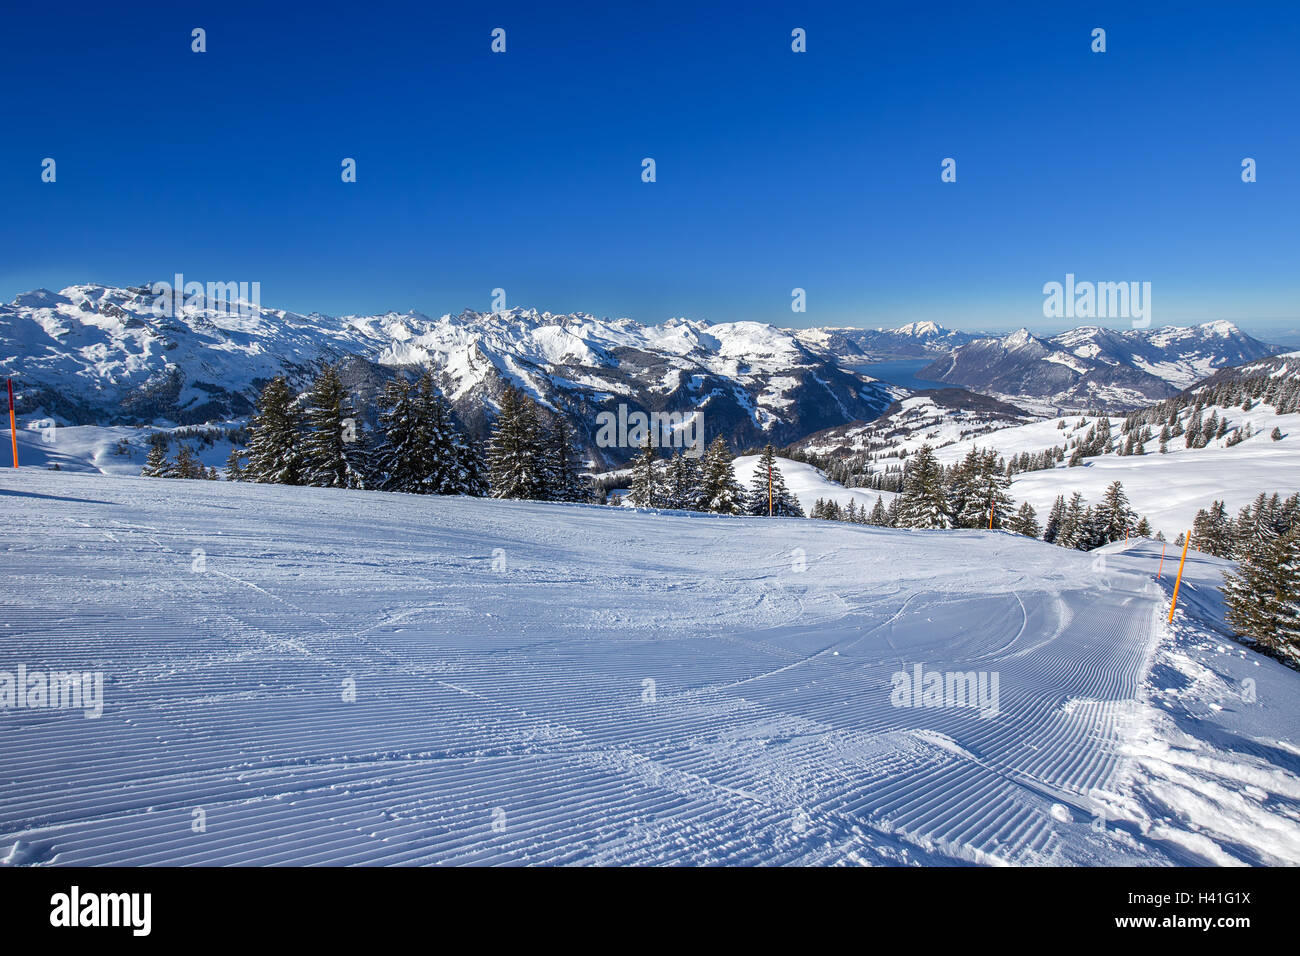 Ski slopes, Lake Lucerne and Swiss Alps covered by fresh new snow seen from the Spirstock peak in Hoch-Ybrig ski resort Stock Photo